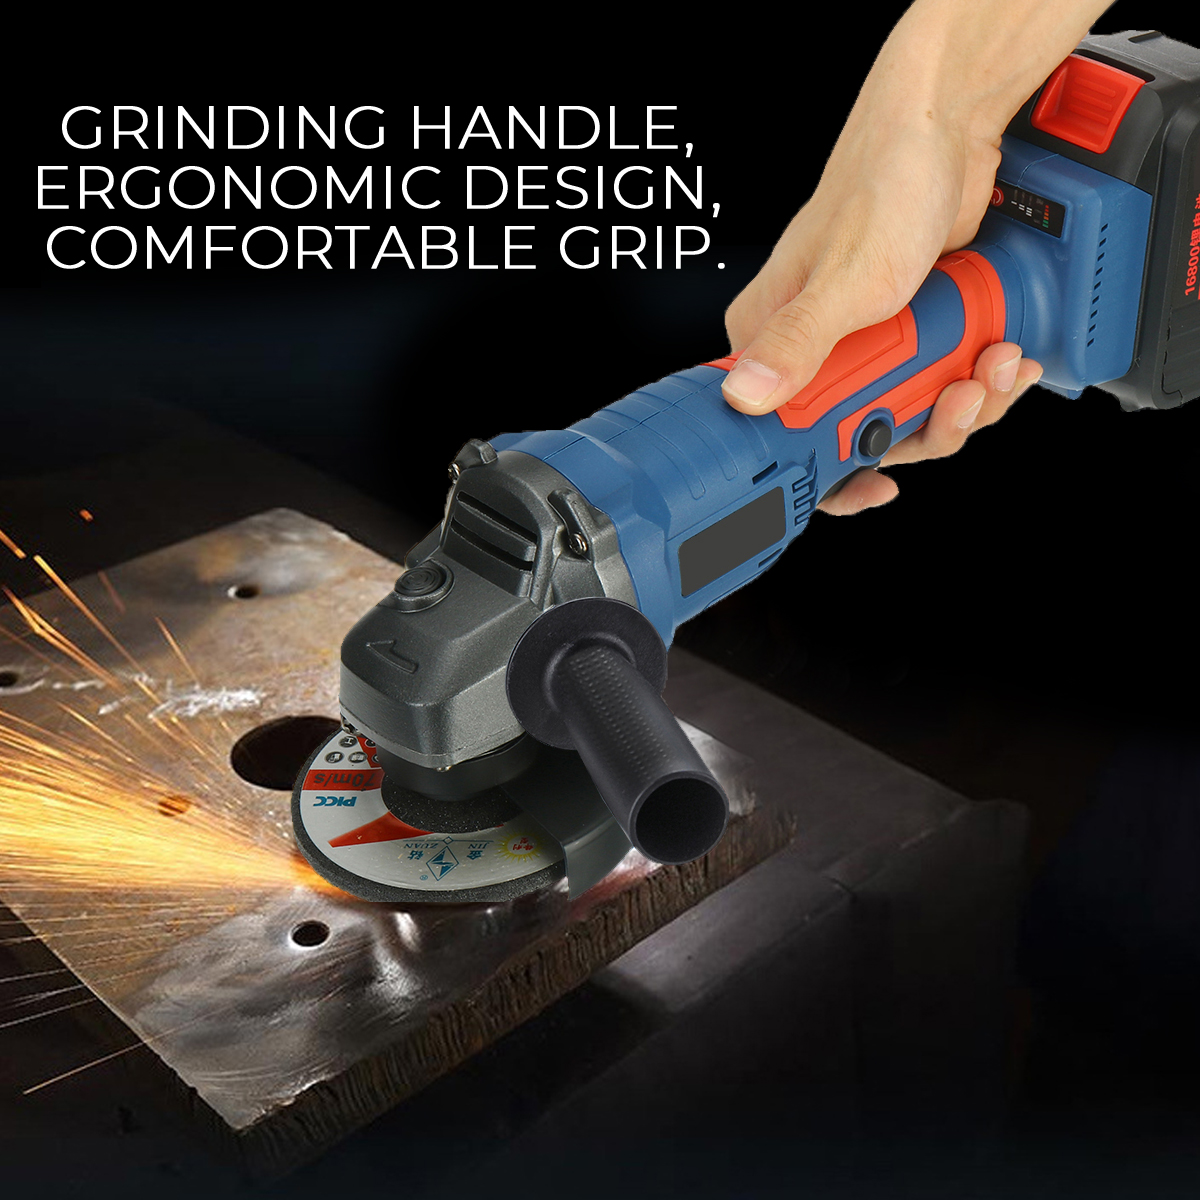 128VF-100mm-Cordless-Brushless-Angle-Grinder-Cutting-Grinding-Tool-Rechargeable-1661352-2